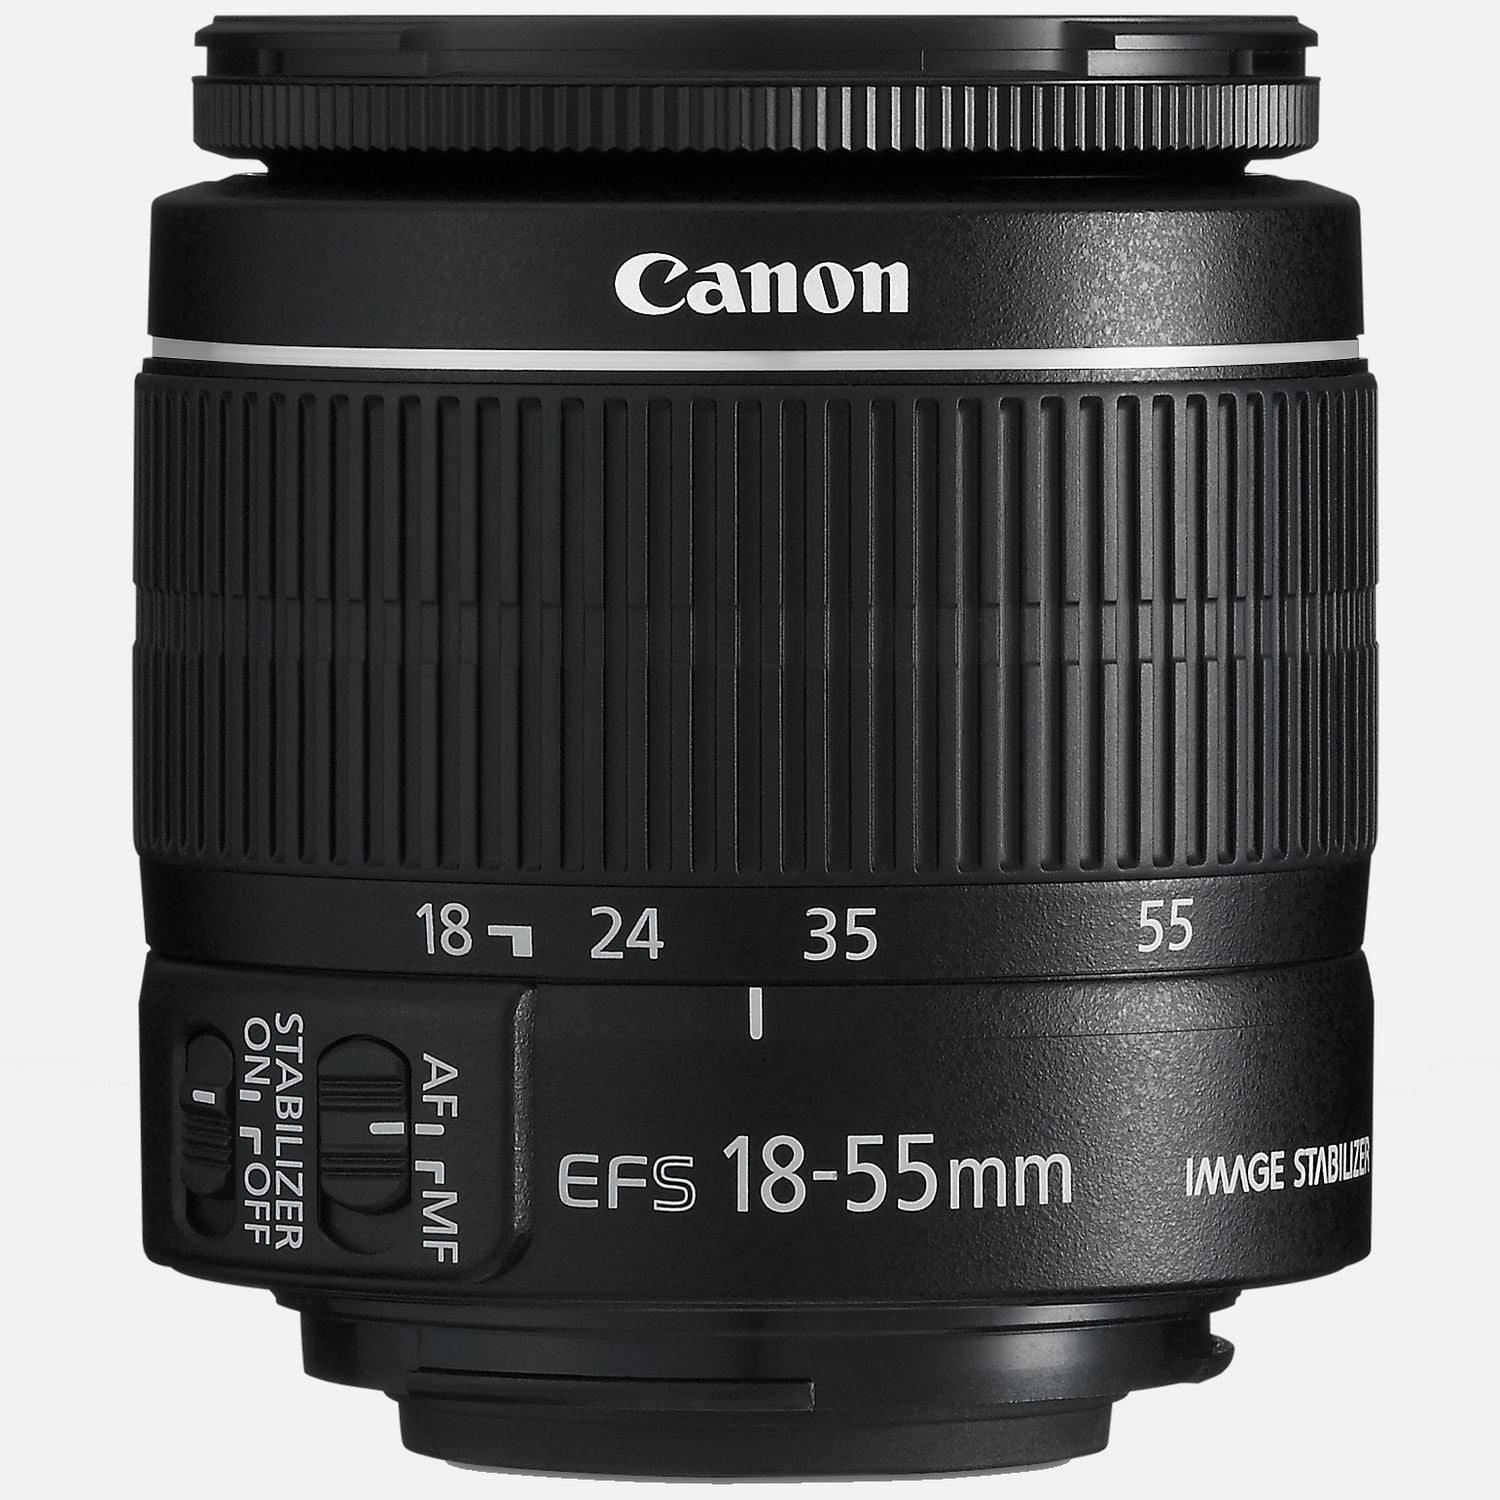 Canon EF-S 18-55mm IS f/3.5-5.6 Lens - Black